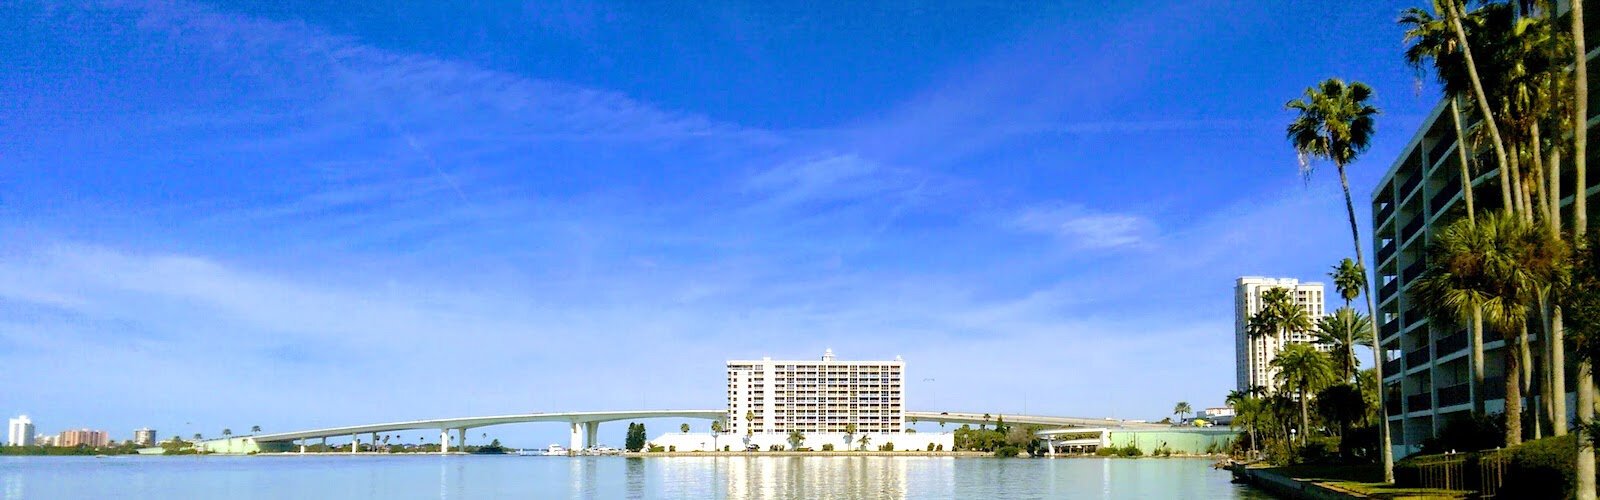 Clearwater has been named a Beacon City for its efforts in protecting the Intracoastal Waterway, its popular beaches, and the greater Gulf Coast.